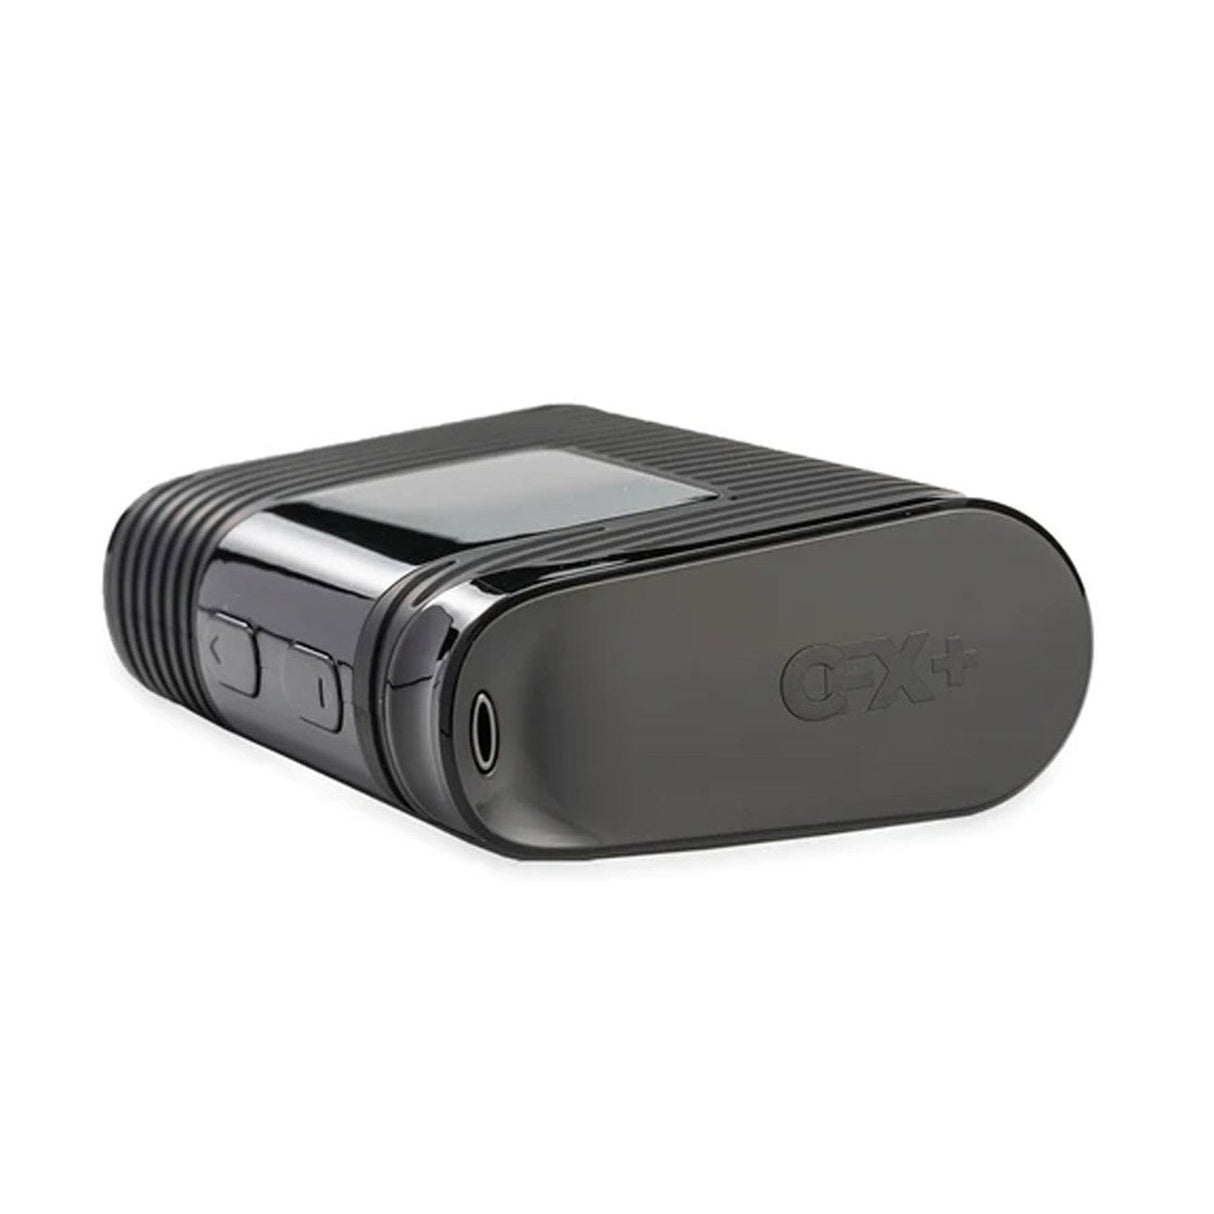 Boundless CFX+ Vaporizer in sleek black, angled side view with clear display screen